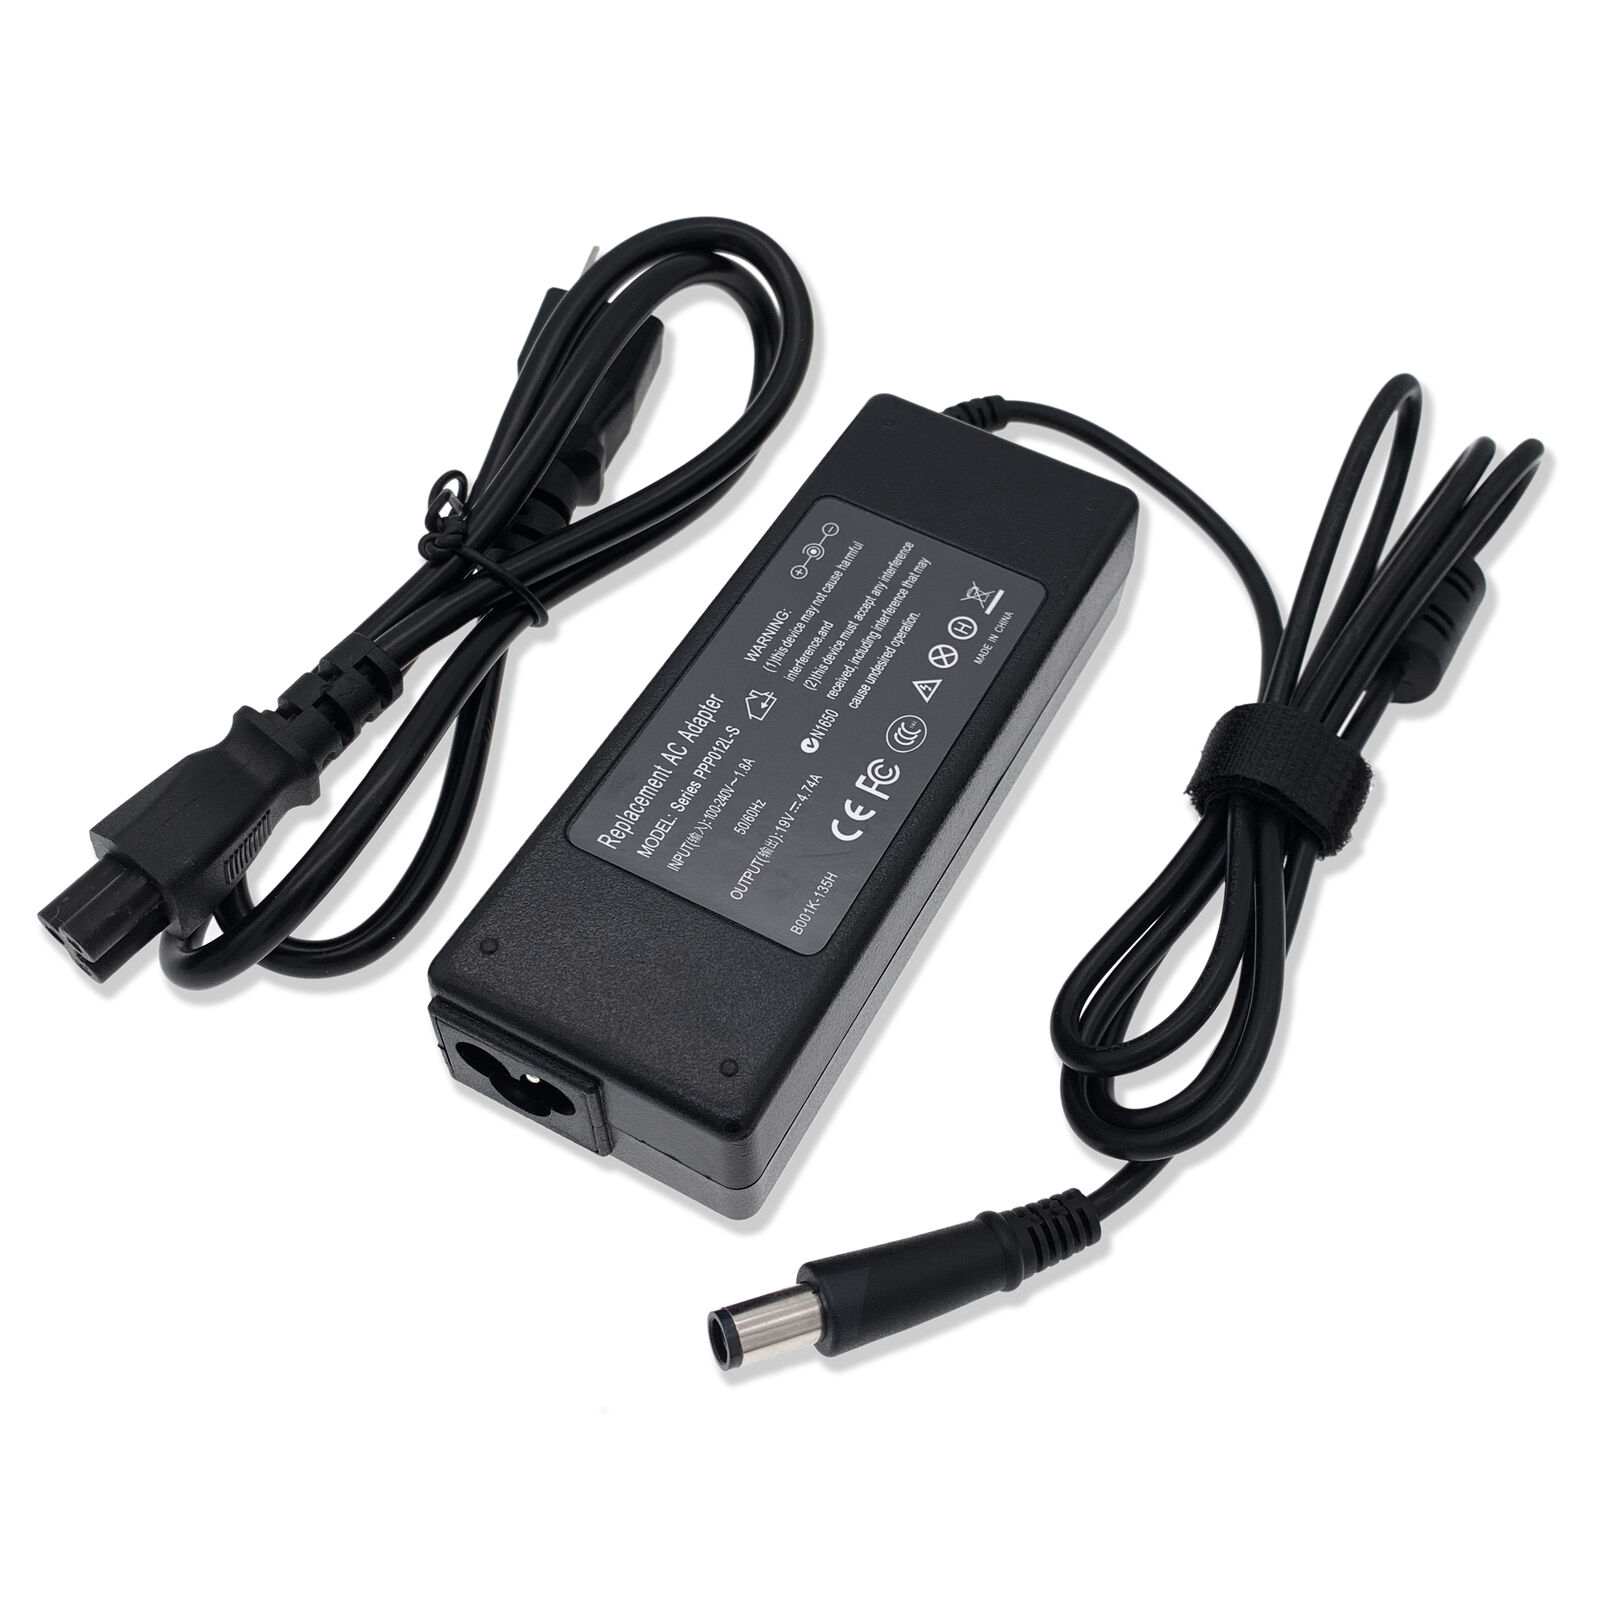 90W New AC Power Adapter Charger For HP Pavilion dv6t-6b00 dv6t-6c00 dv6t-1000